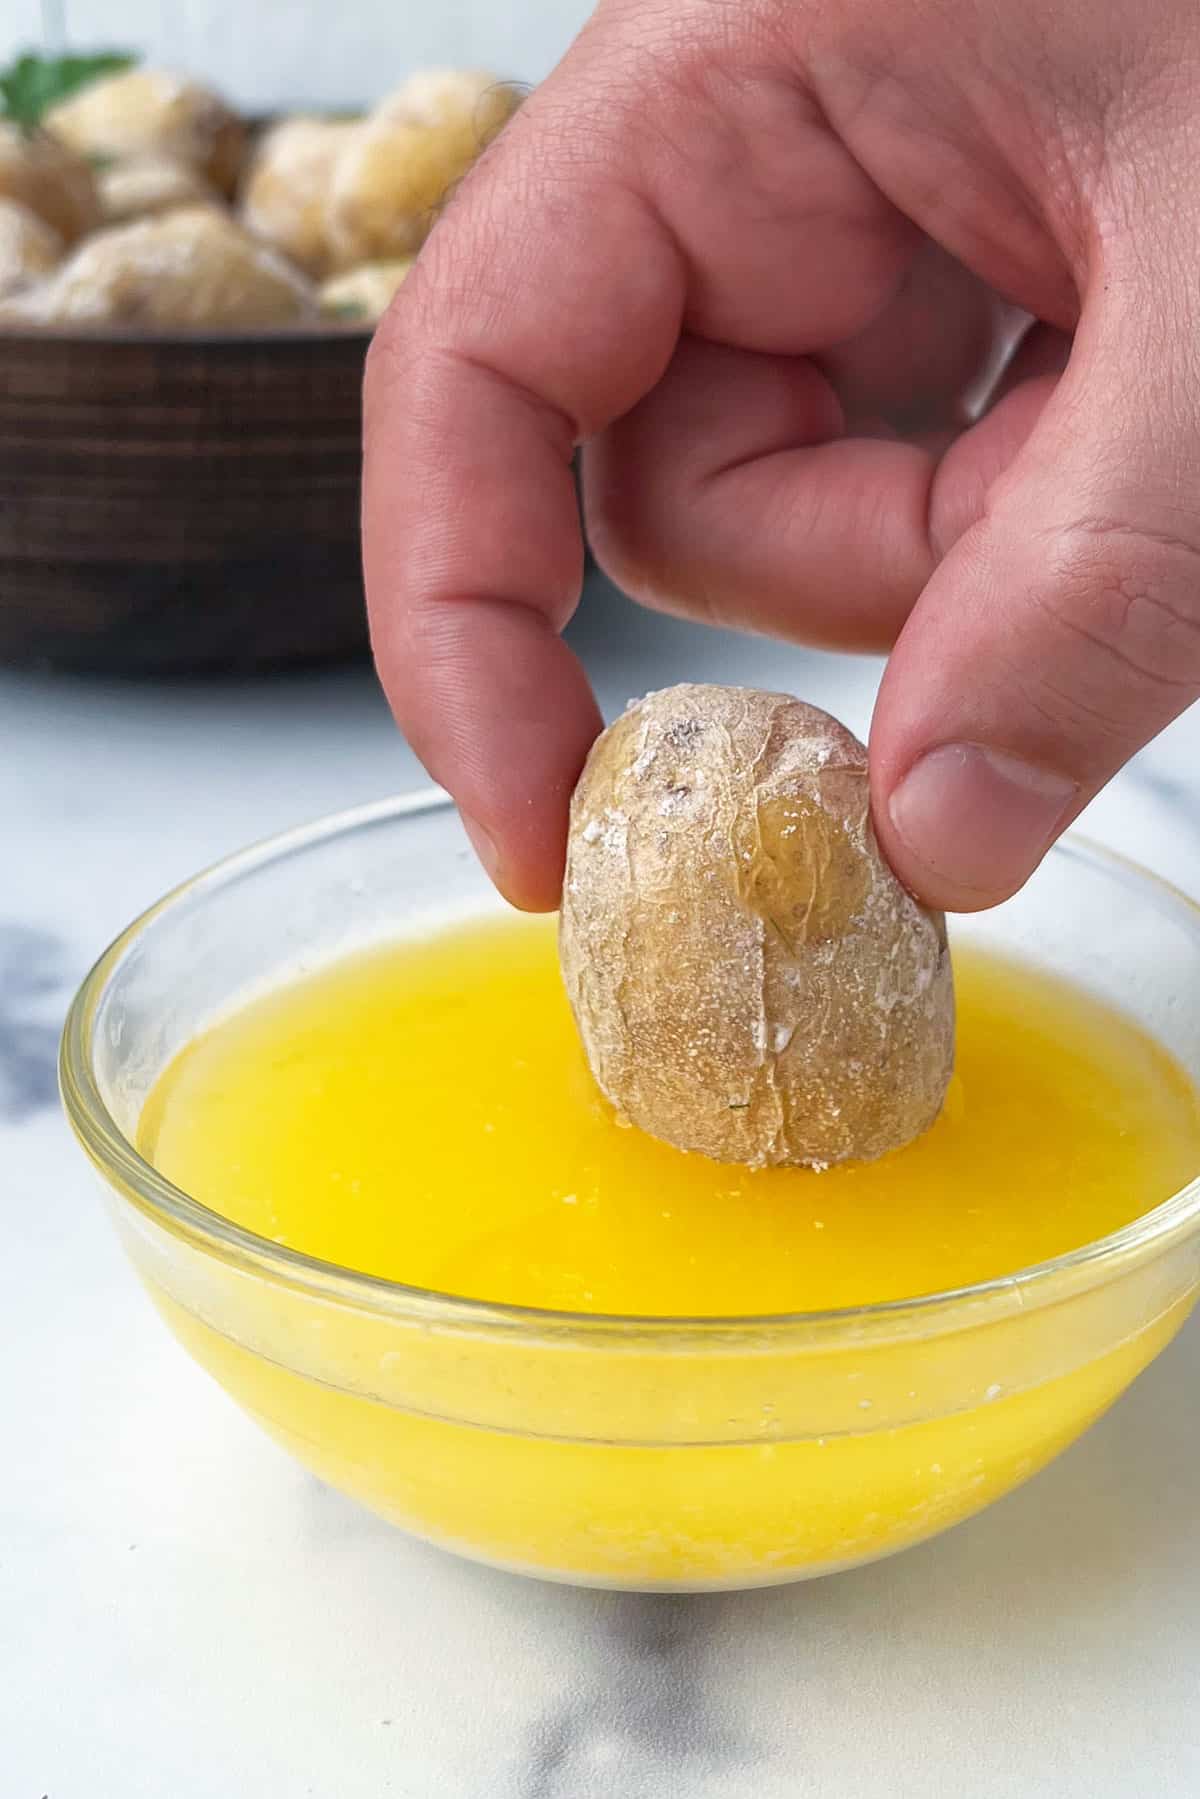 A hand holding a salt-crusted new potato and dipping it into a small glass bowl of melted butter.